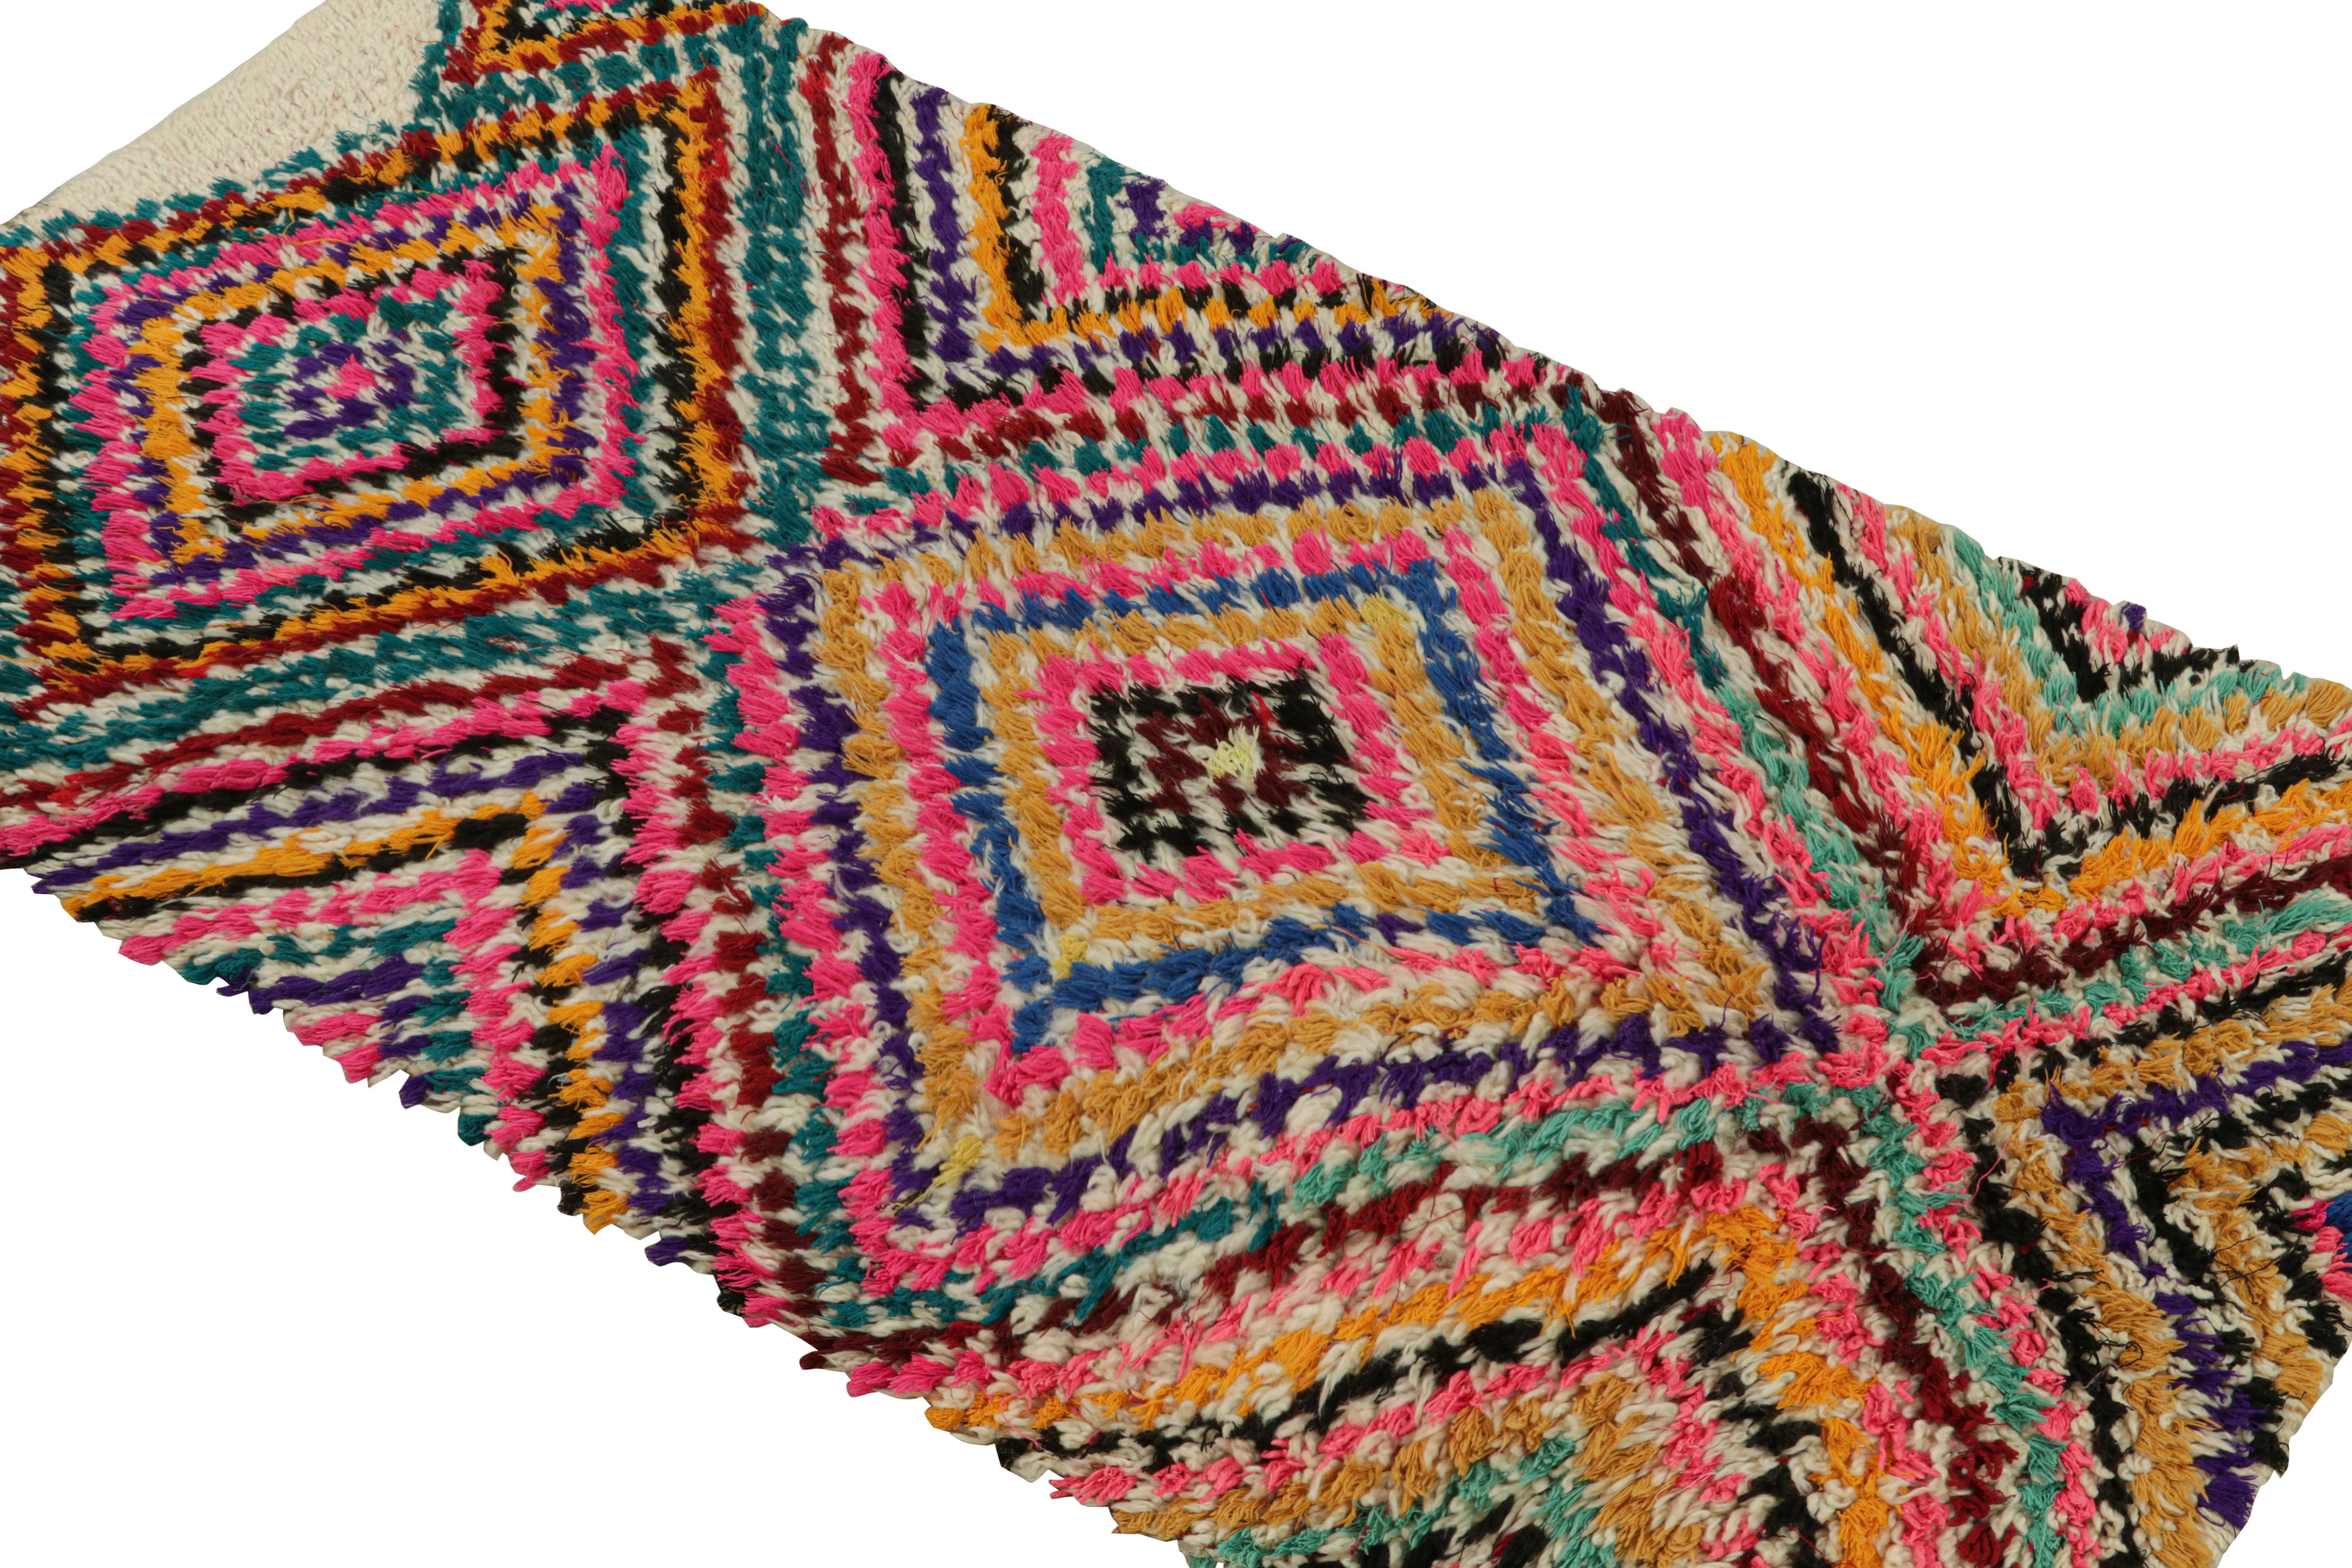 Hand-knotted in wool circa 1950-1960, this 3x6 vintage Moroccan runner rug with polychromatic diamond medallions, hails from the Azilal tribe.  

On the Design: 

This piece enjoys a lush high pile with polychromatic primitivist Berber geometric